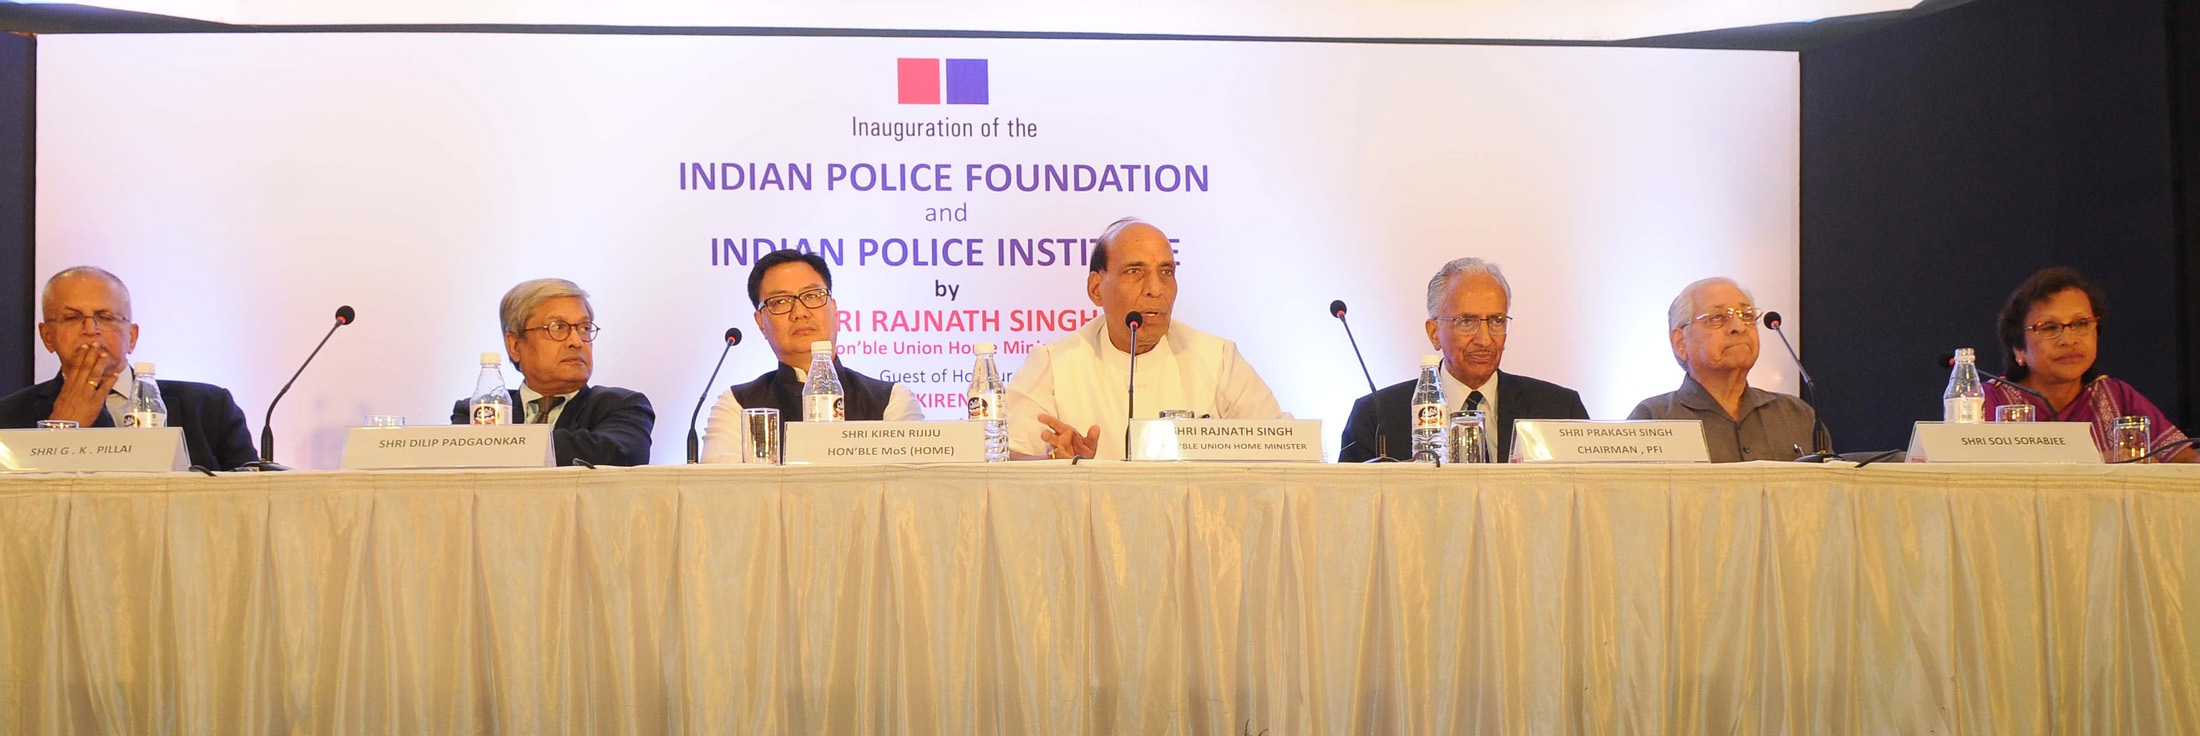 The Union Home Minister, Shri Rajnath Singh addressing at the inauguration of the Indian Police Foundation and the Indian Police Institute, in New Delhi on October 21, 2015. 	The Minister of State for Home Affairs, Shri Kiren Rijiju and other dignitaries are also seen.